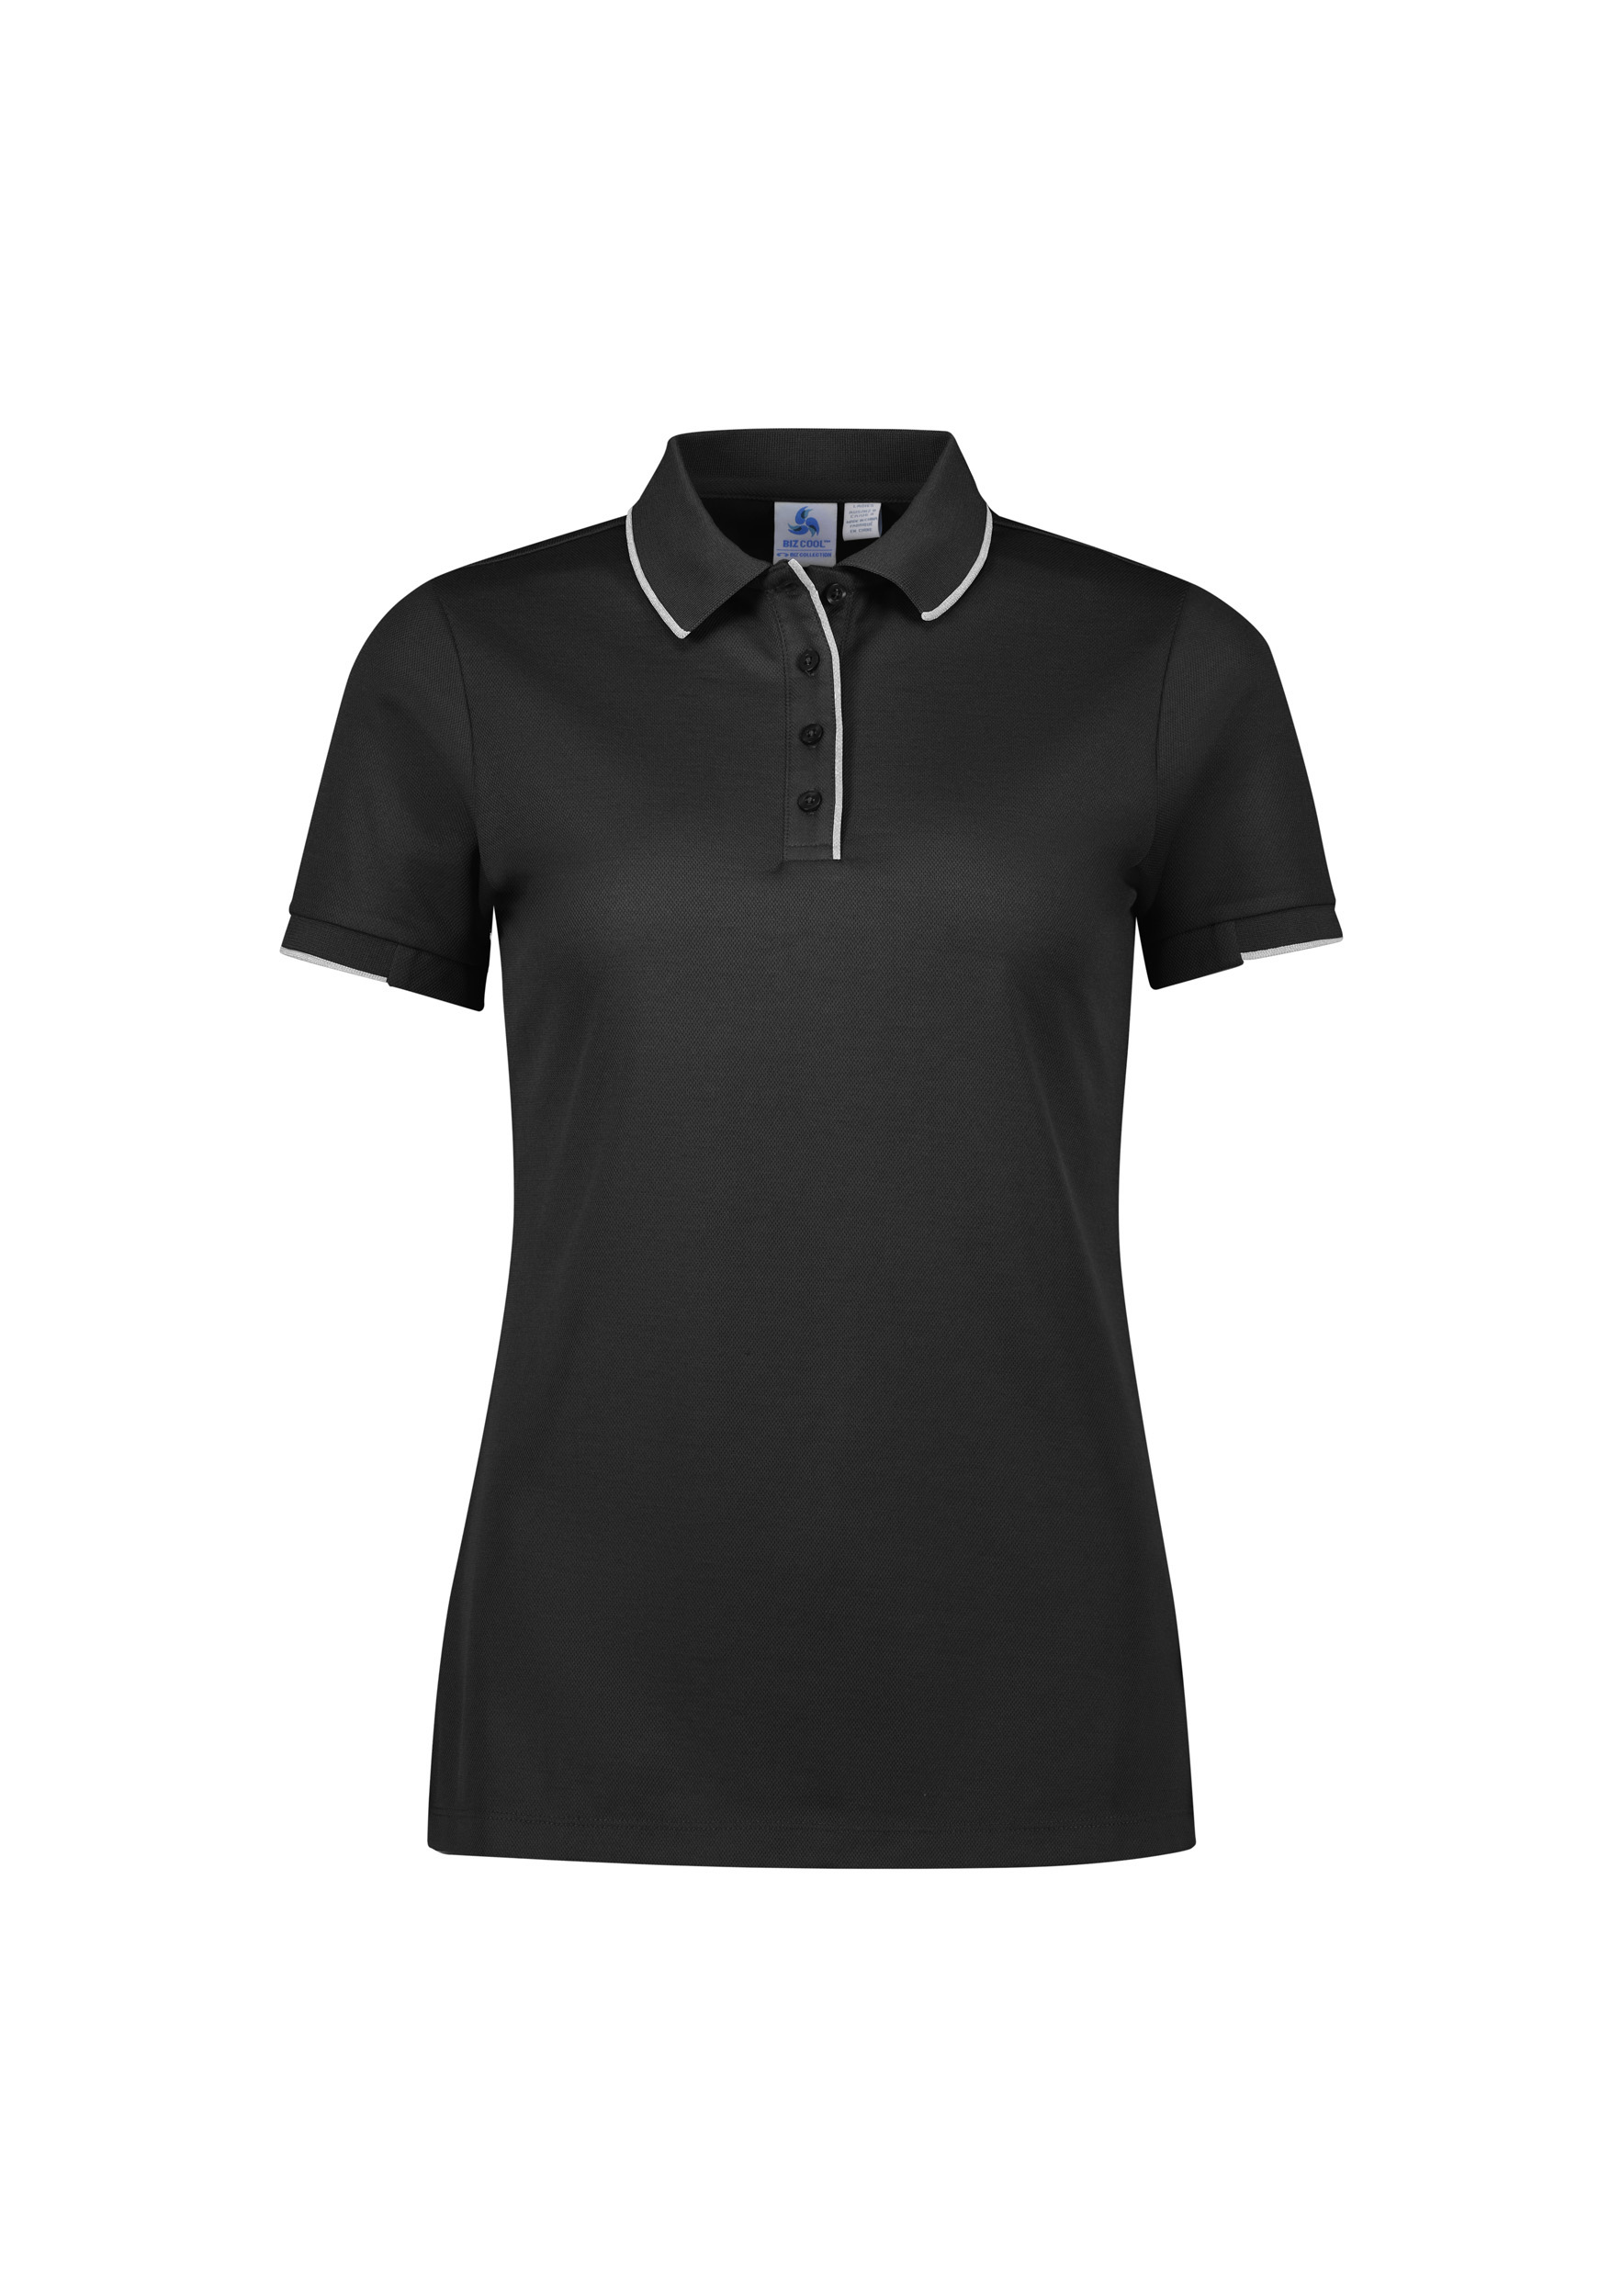 WOMENS FOCUS POLO BLK/WHT 10 80% POLY, 20% COTTON-BACK 185GSM